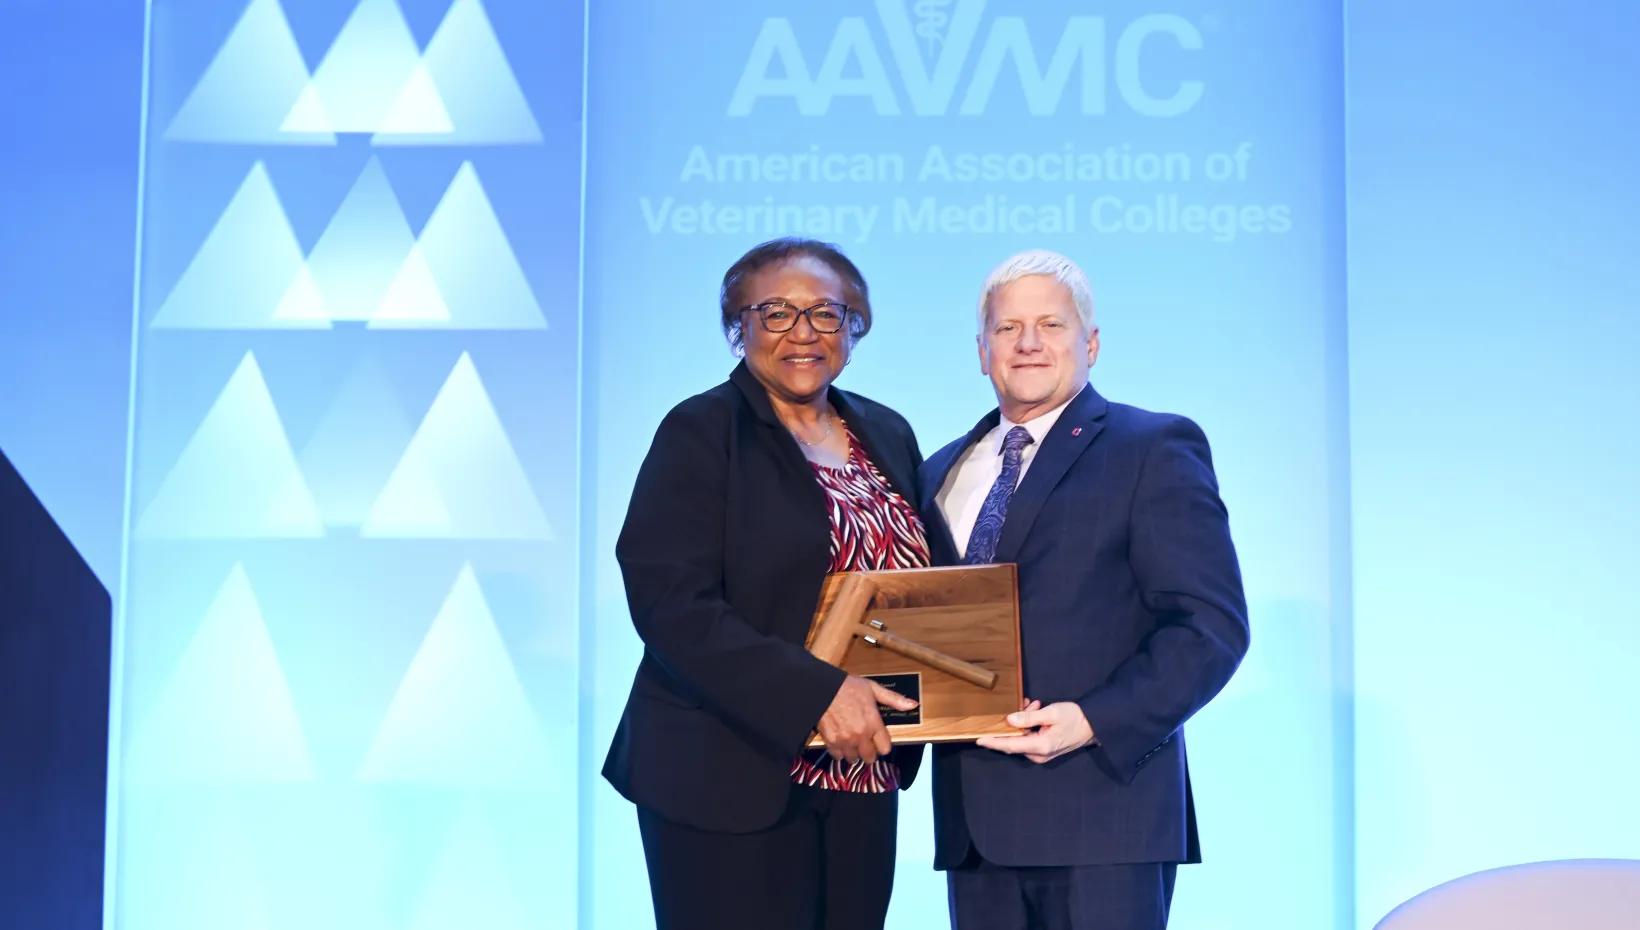 Dr. Perry passing the gavel to Dr. Moore for the AAMVC presidency 